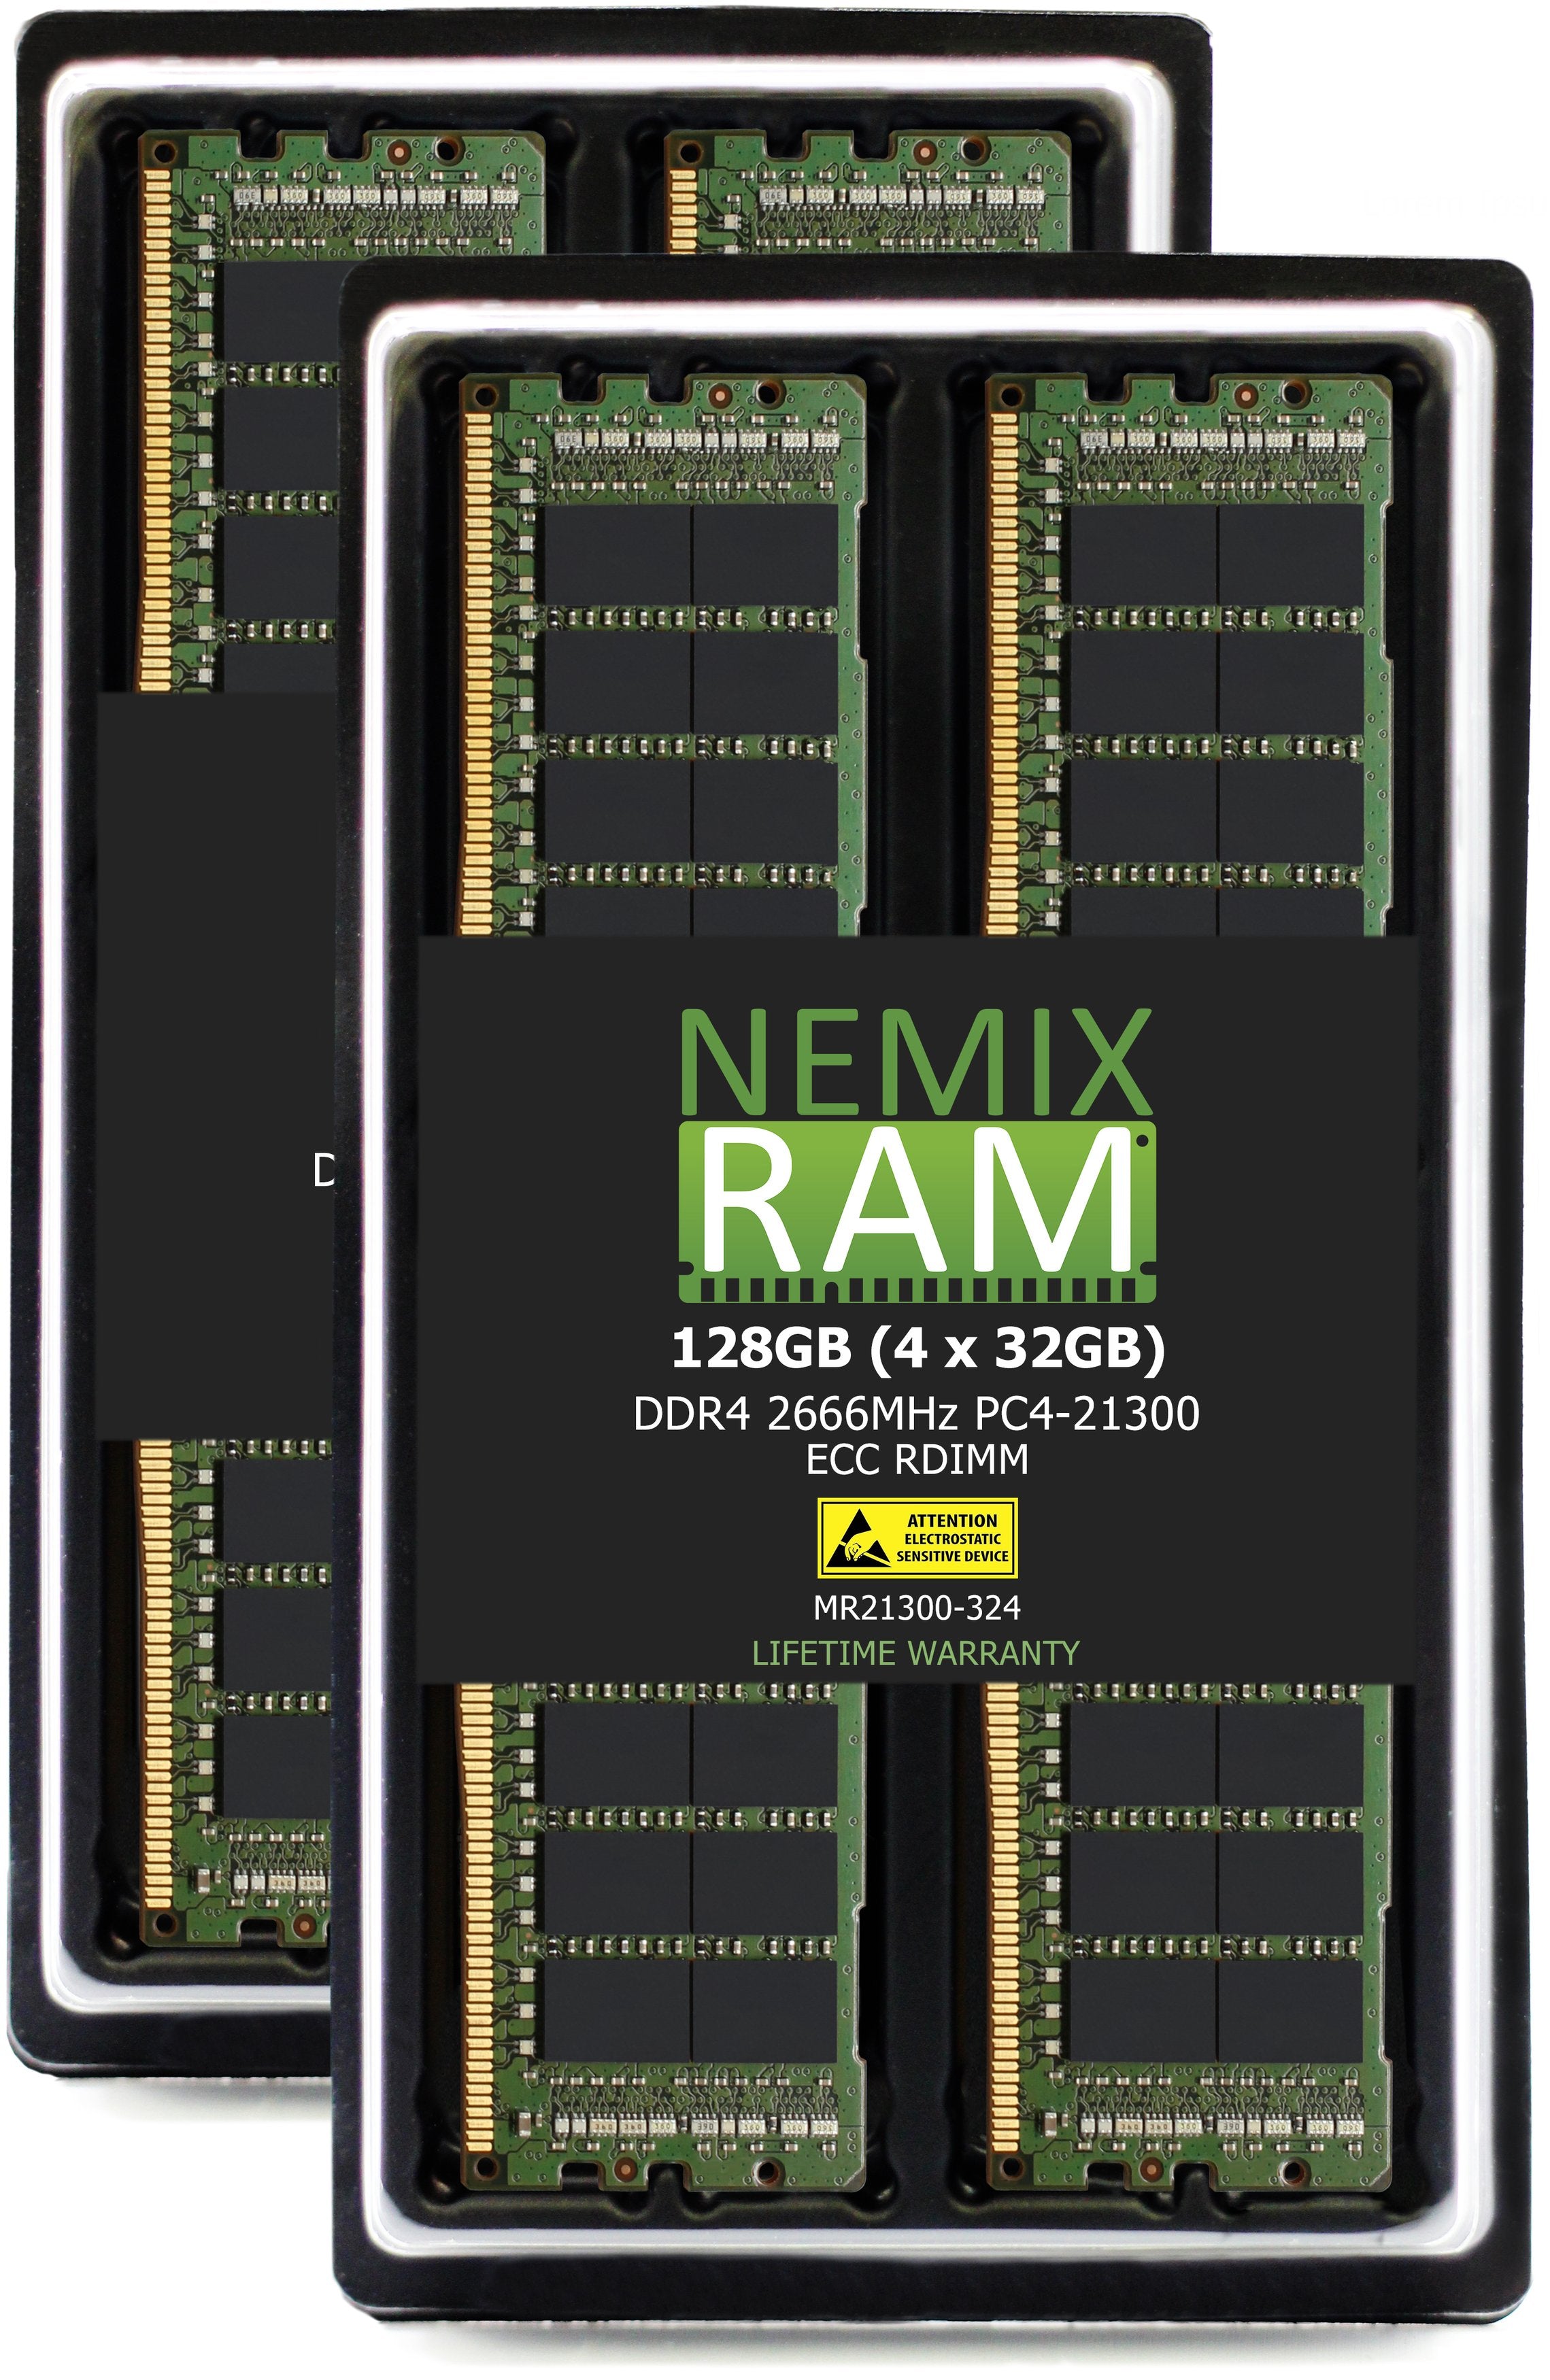 DDR4 2666MHZ PC4-21300 RDIMM Compatible with Synology FlashStation FS3600